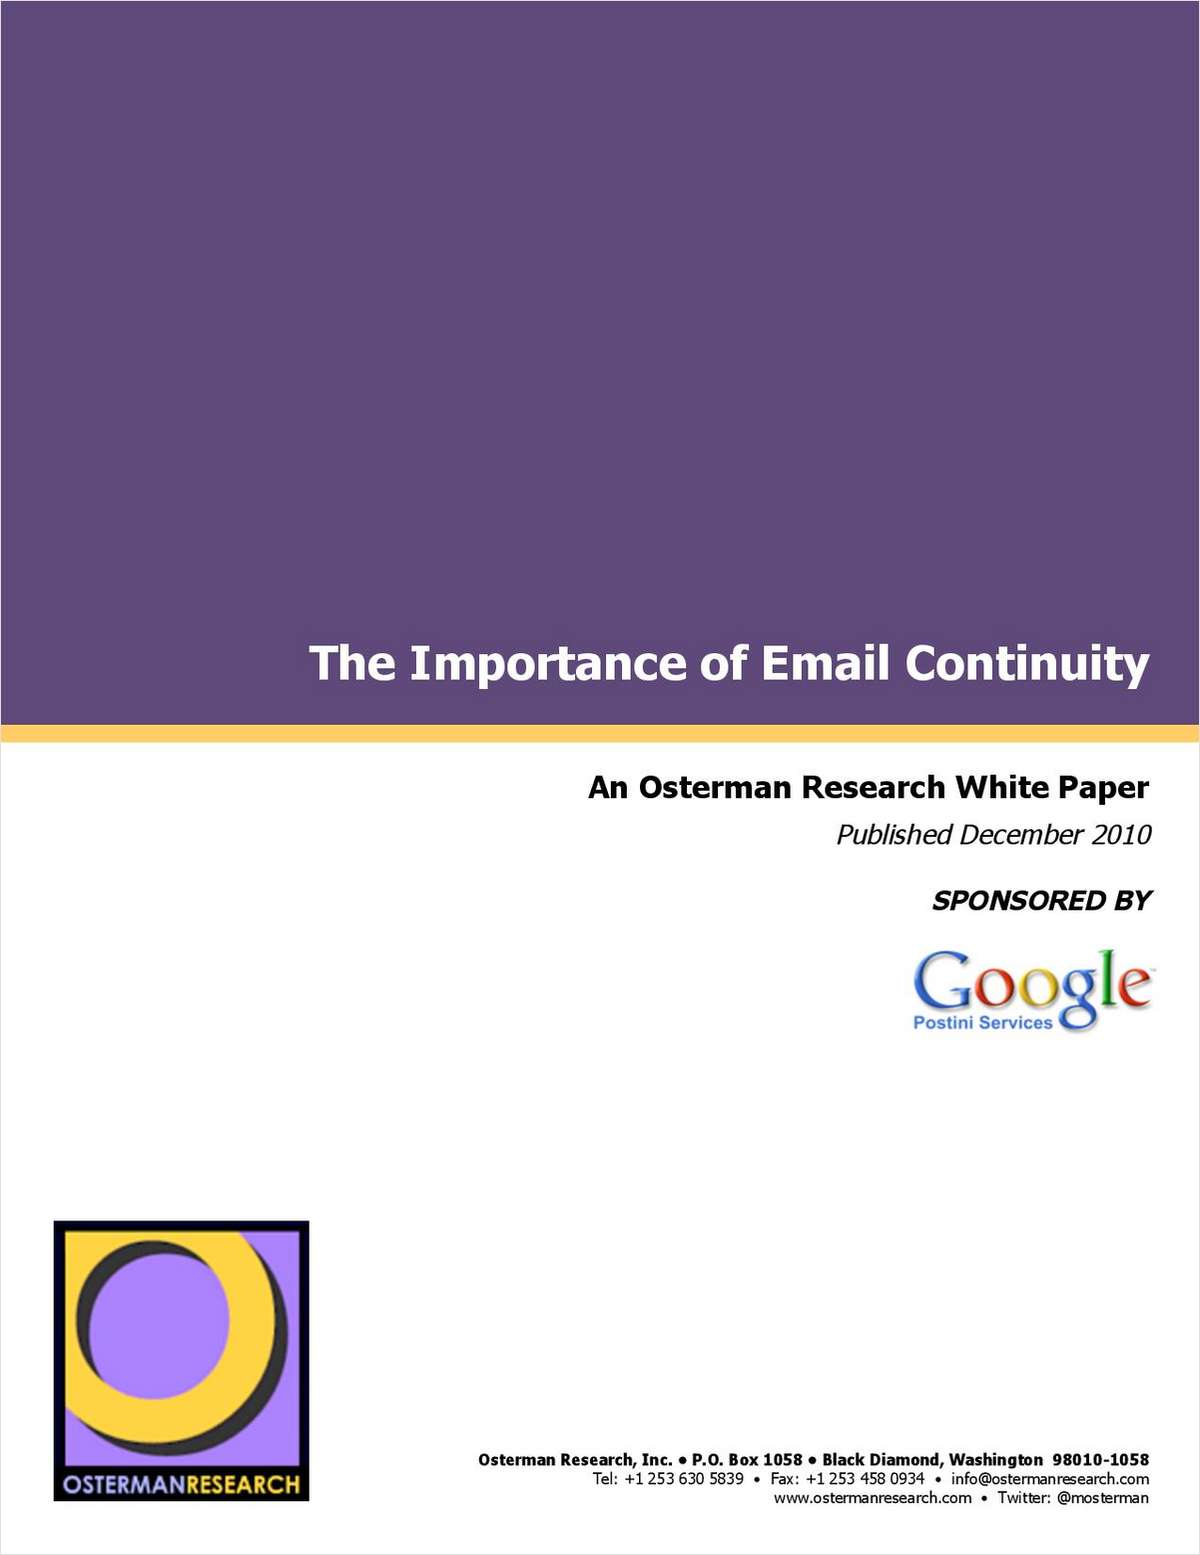 The Importance of Email Continuity